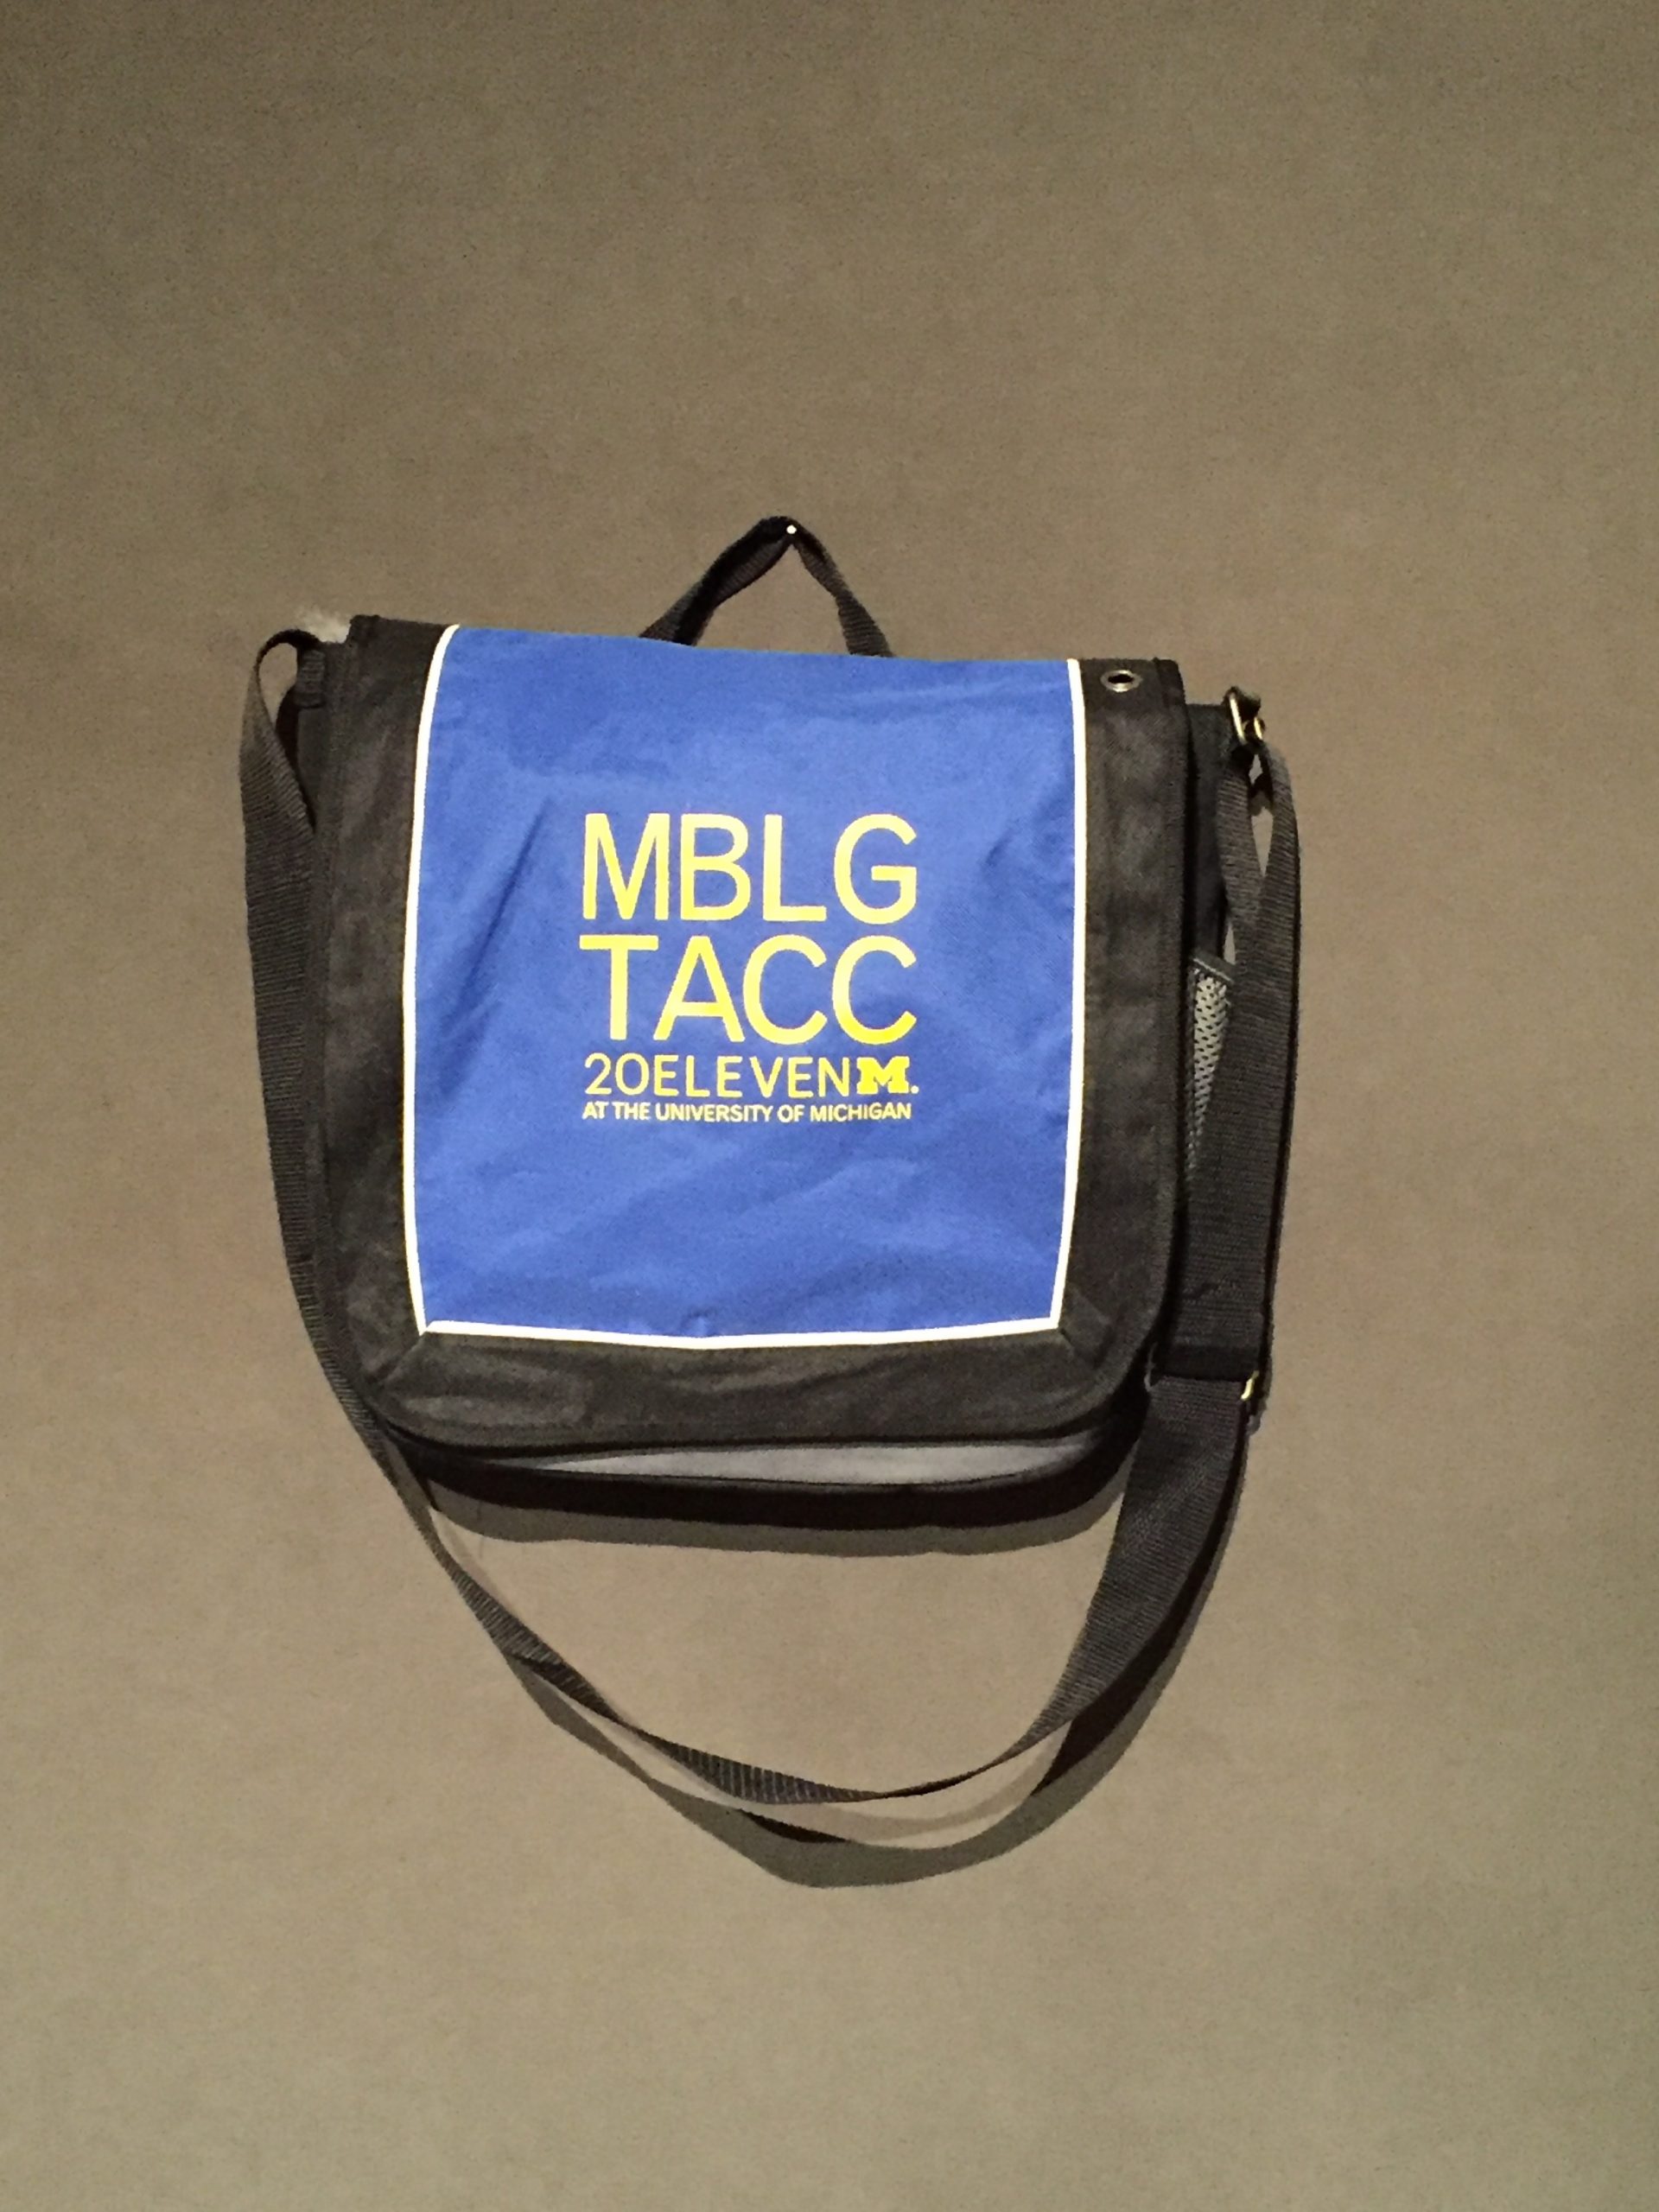 blue and black messenger bag with yellow text reading: "MBLG TACC 20ELEVEN at the University of Michigan"